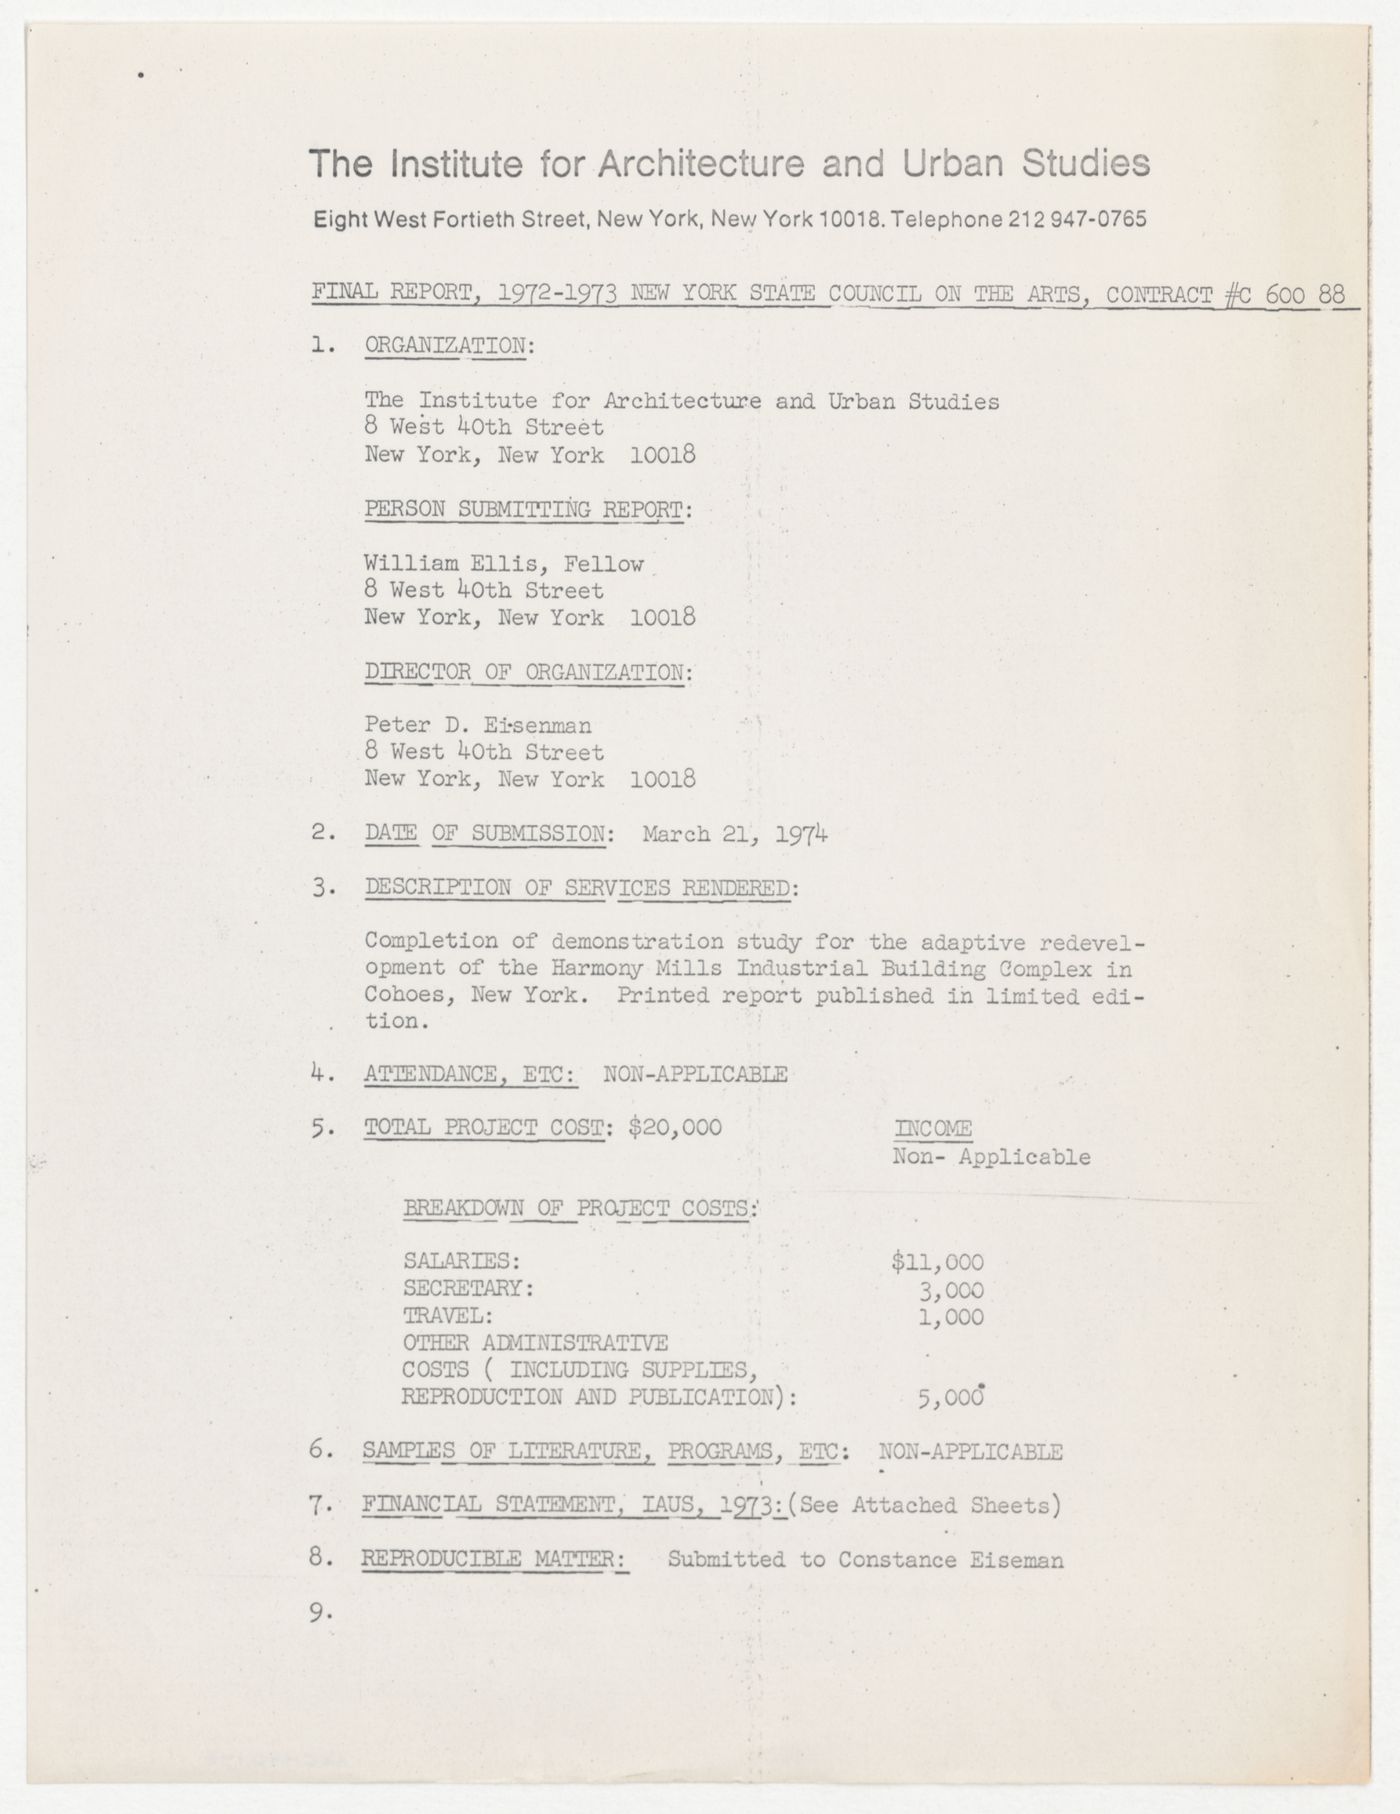 Financial report to the New York State Council on the Arts (NYSCA) for financial year 1972-1973